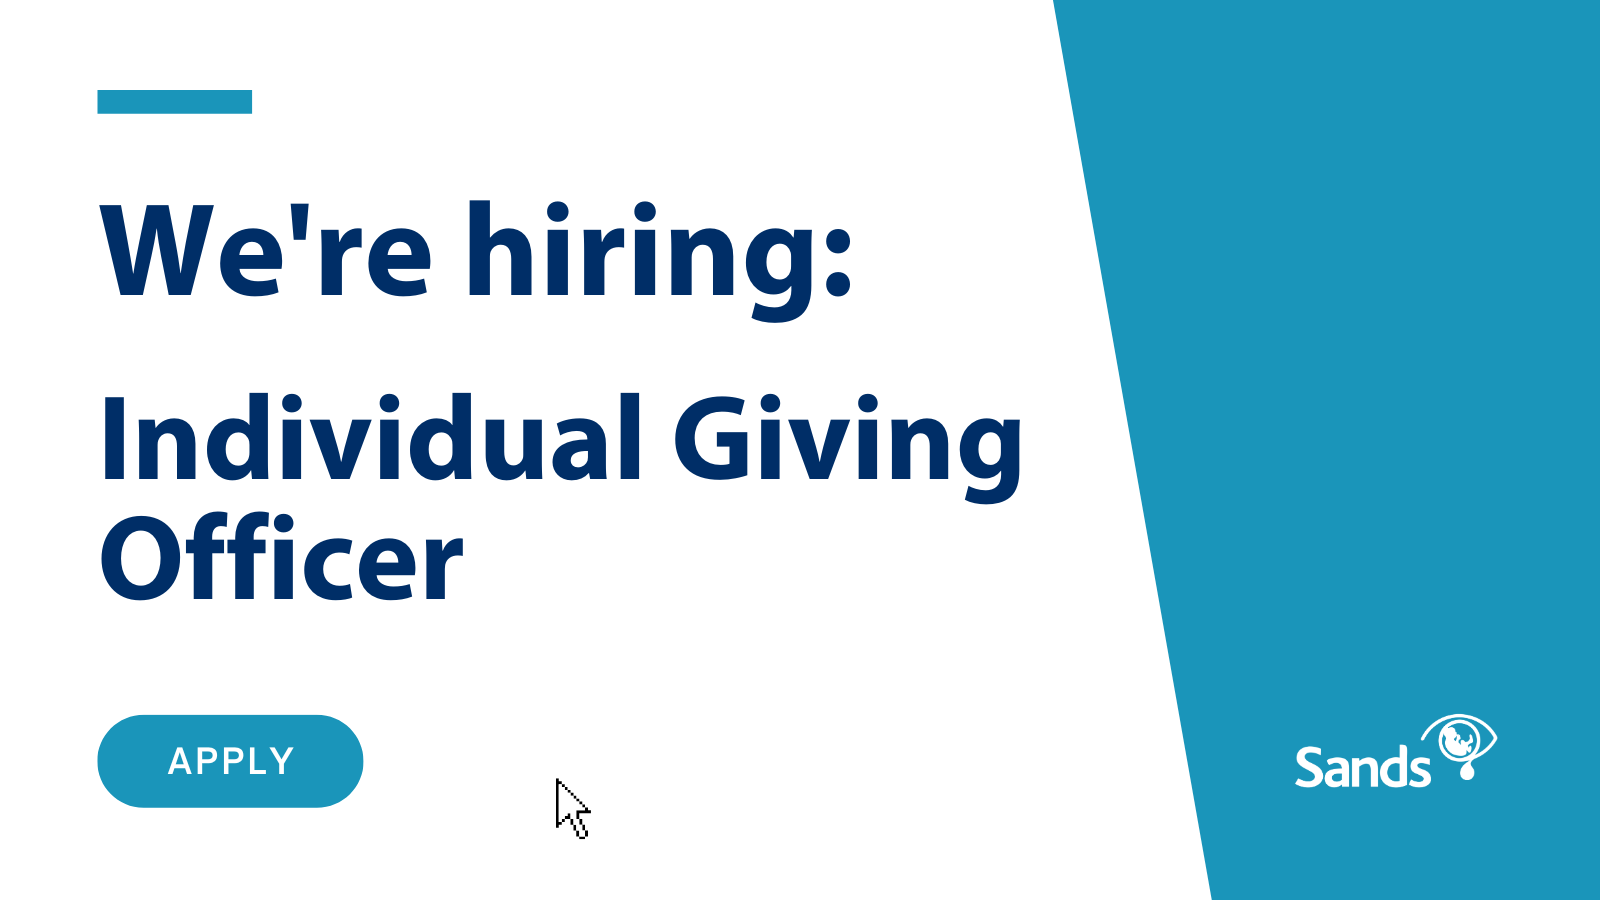 We are hiring Individual Giving Officer